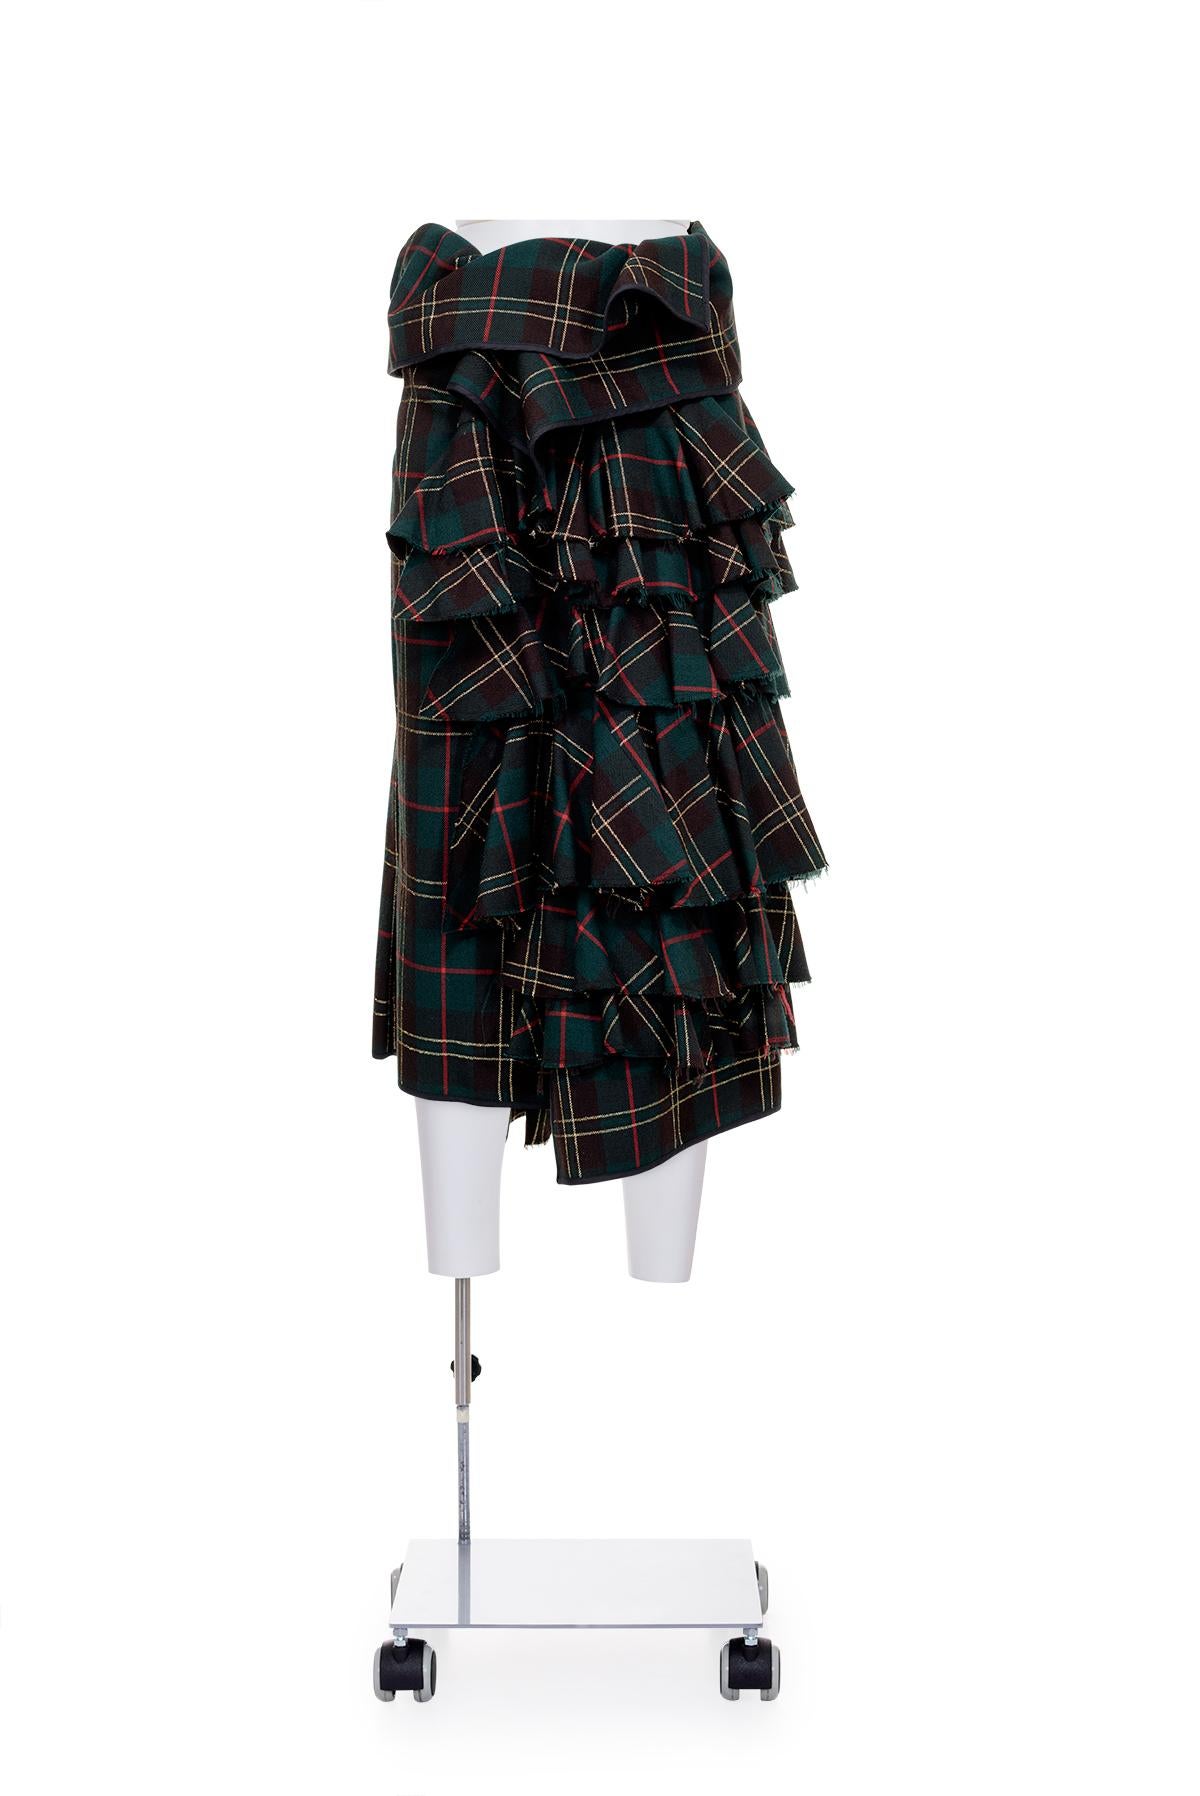 Fall Winter 1999 tartan sarong skirt with lurex details and ruffles by Comme des Garçons.
Pin closure.
The composition tag is missing, seems to be made of wool.